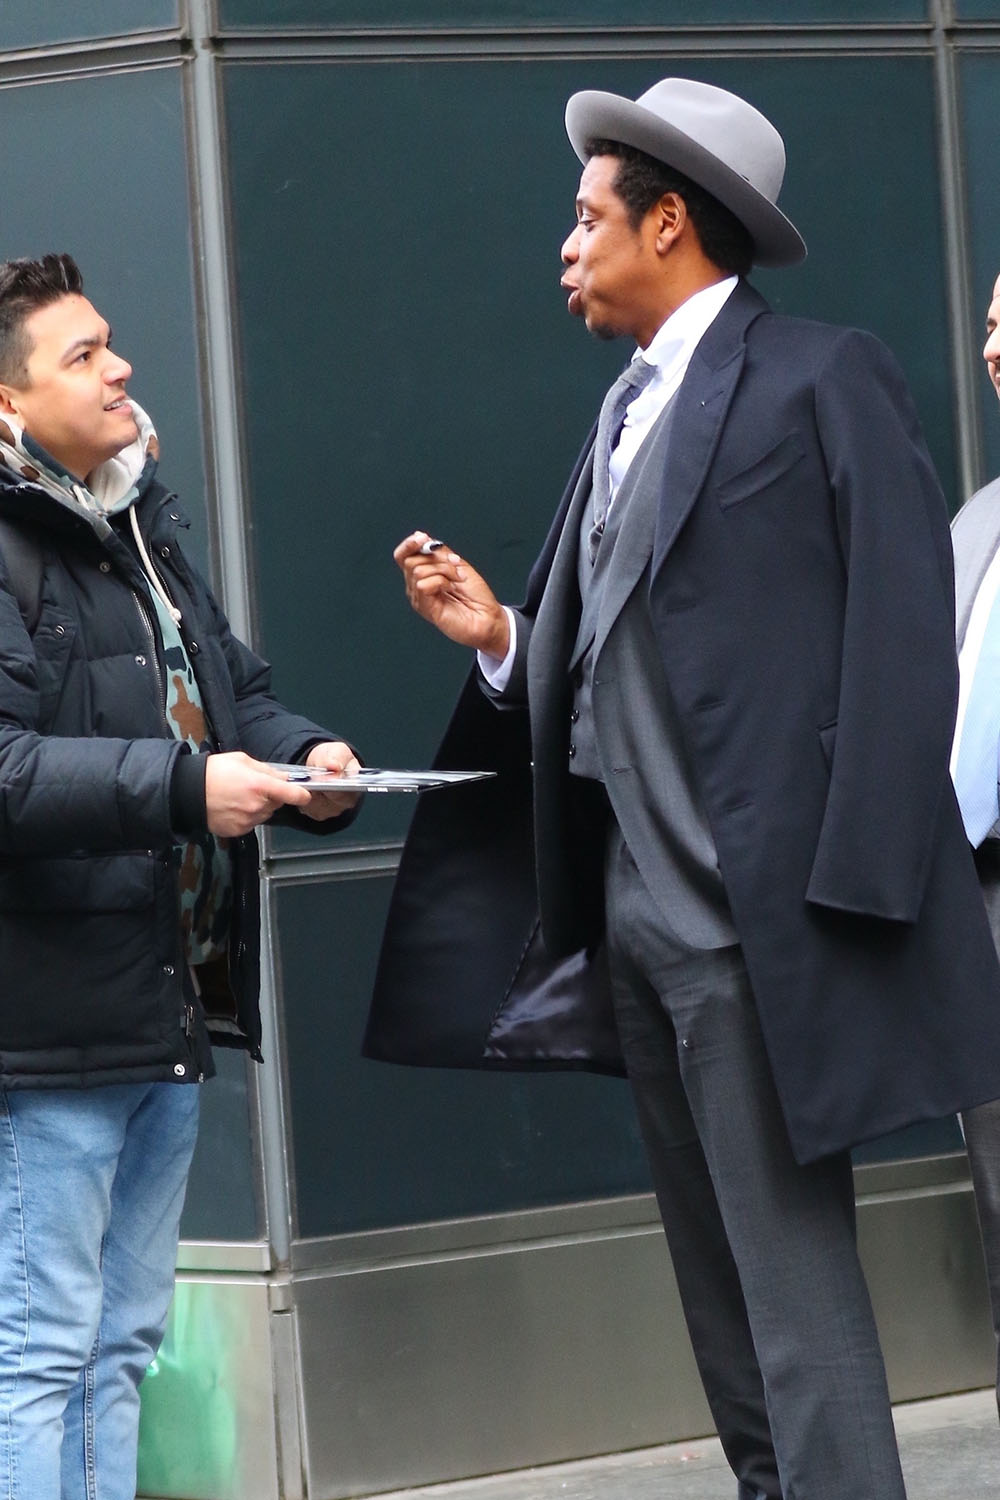 Jay Z is seen speaking to fan before the Roc Nation event